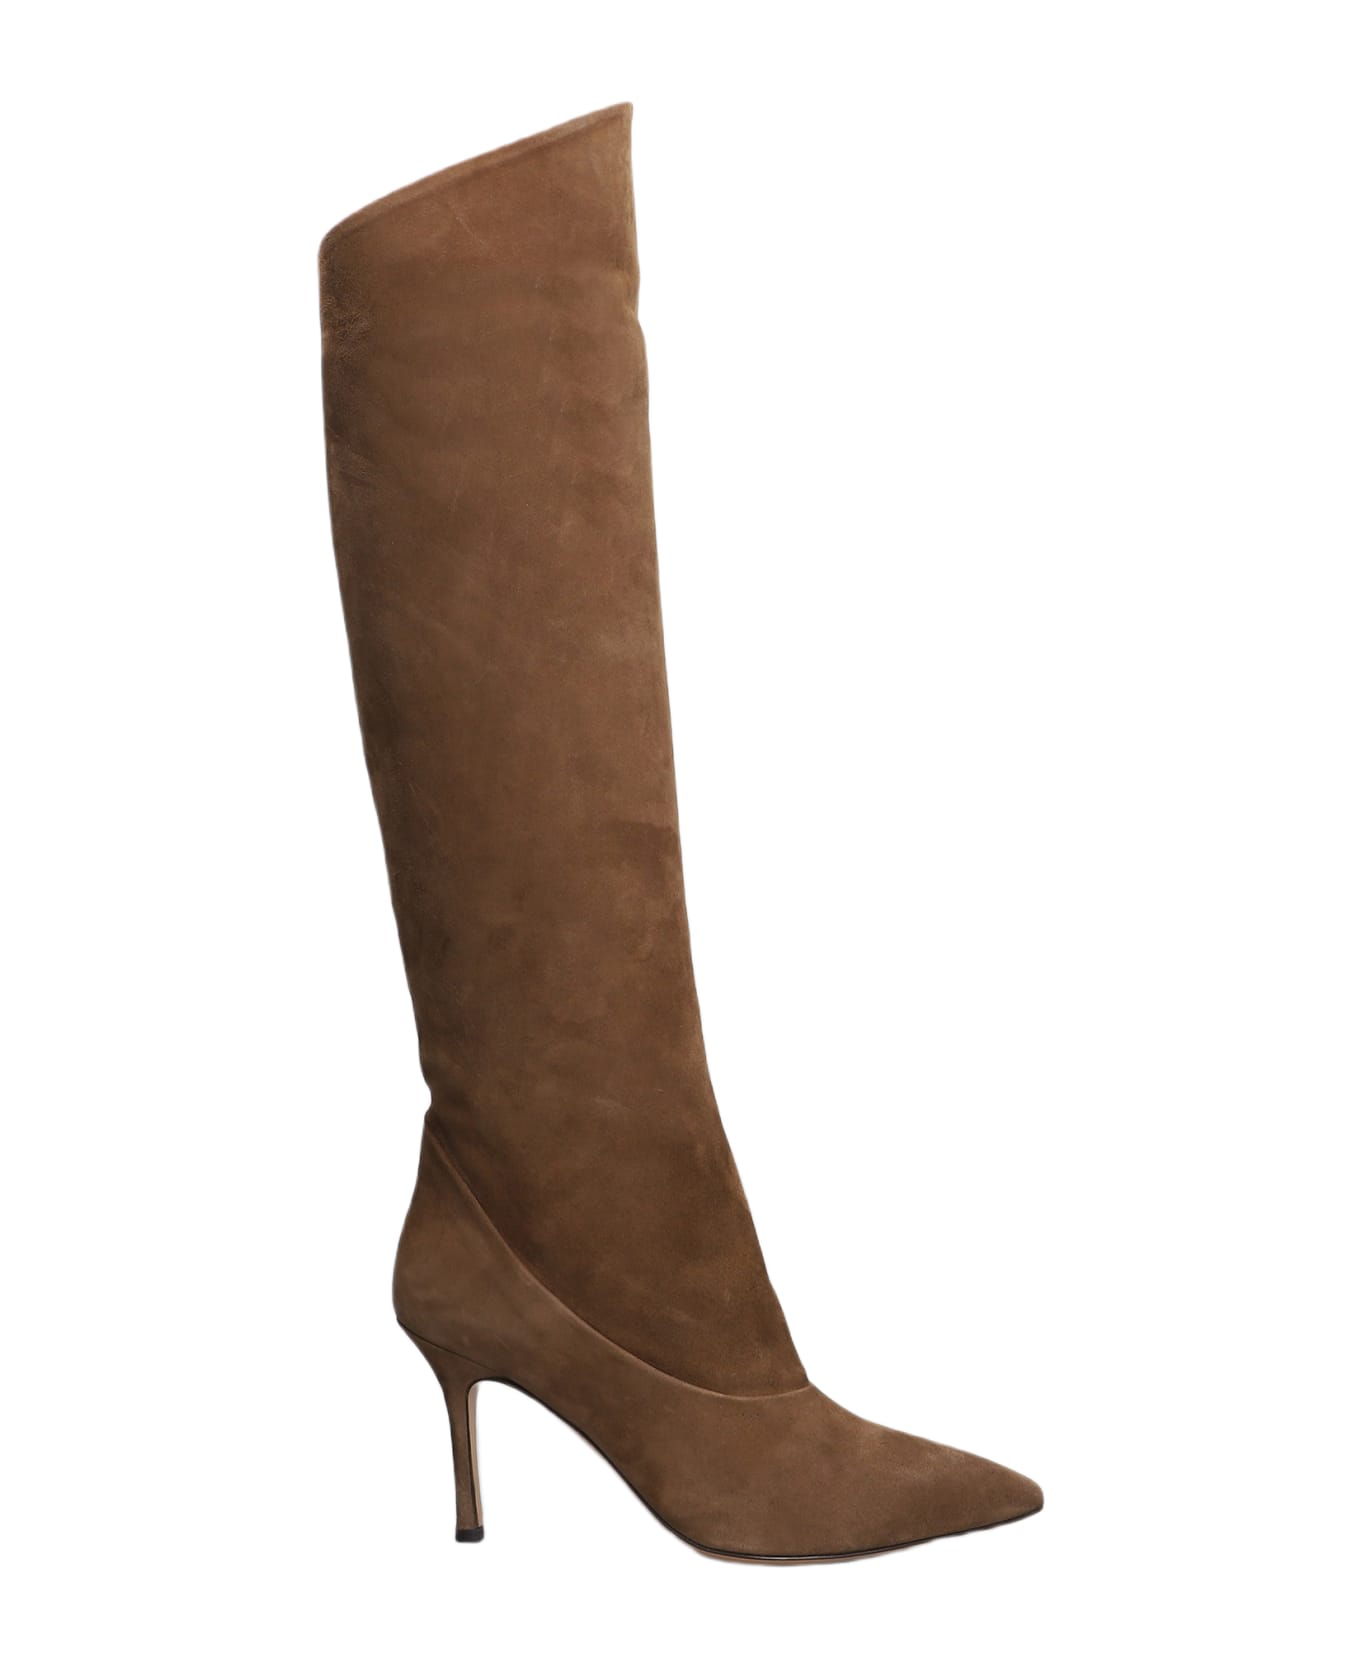 The Seller High Heels Boots In Leather Color Suede - leather color